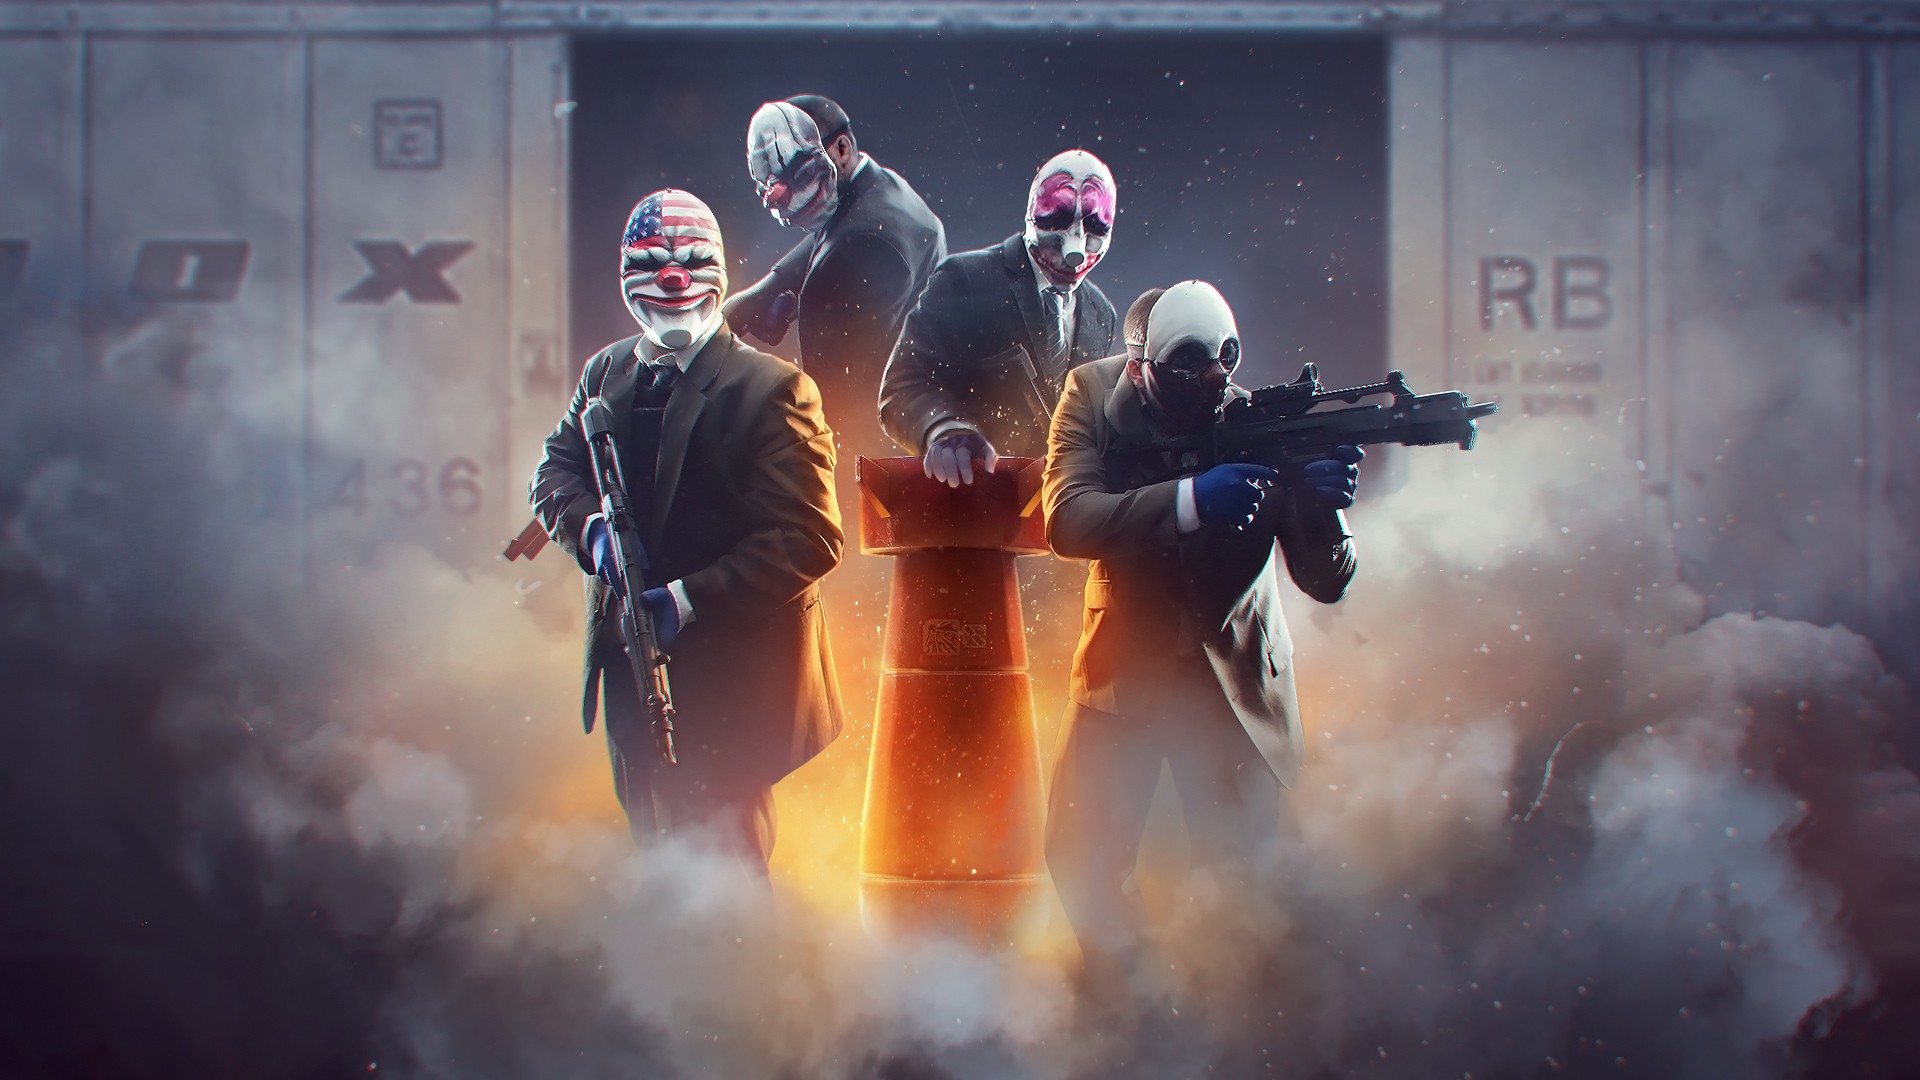 Payday 2 Wallpaper Download Free Amazing Hd Backgrounds For Images, Photos, Reviews